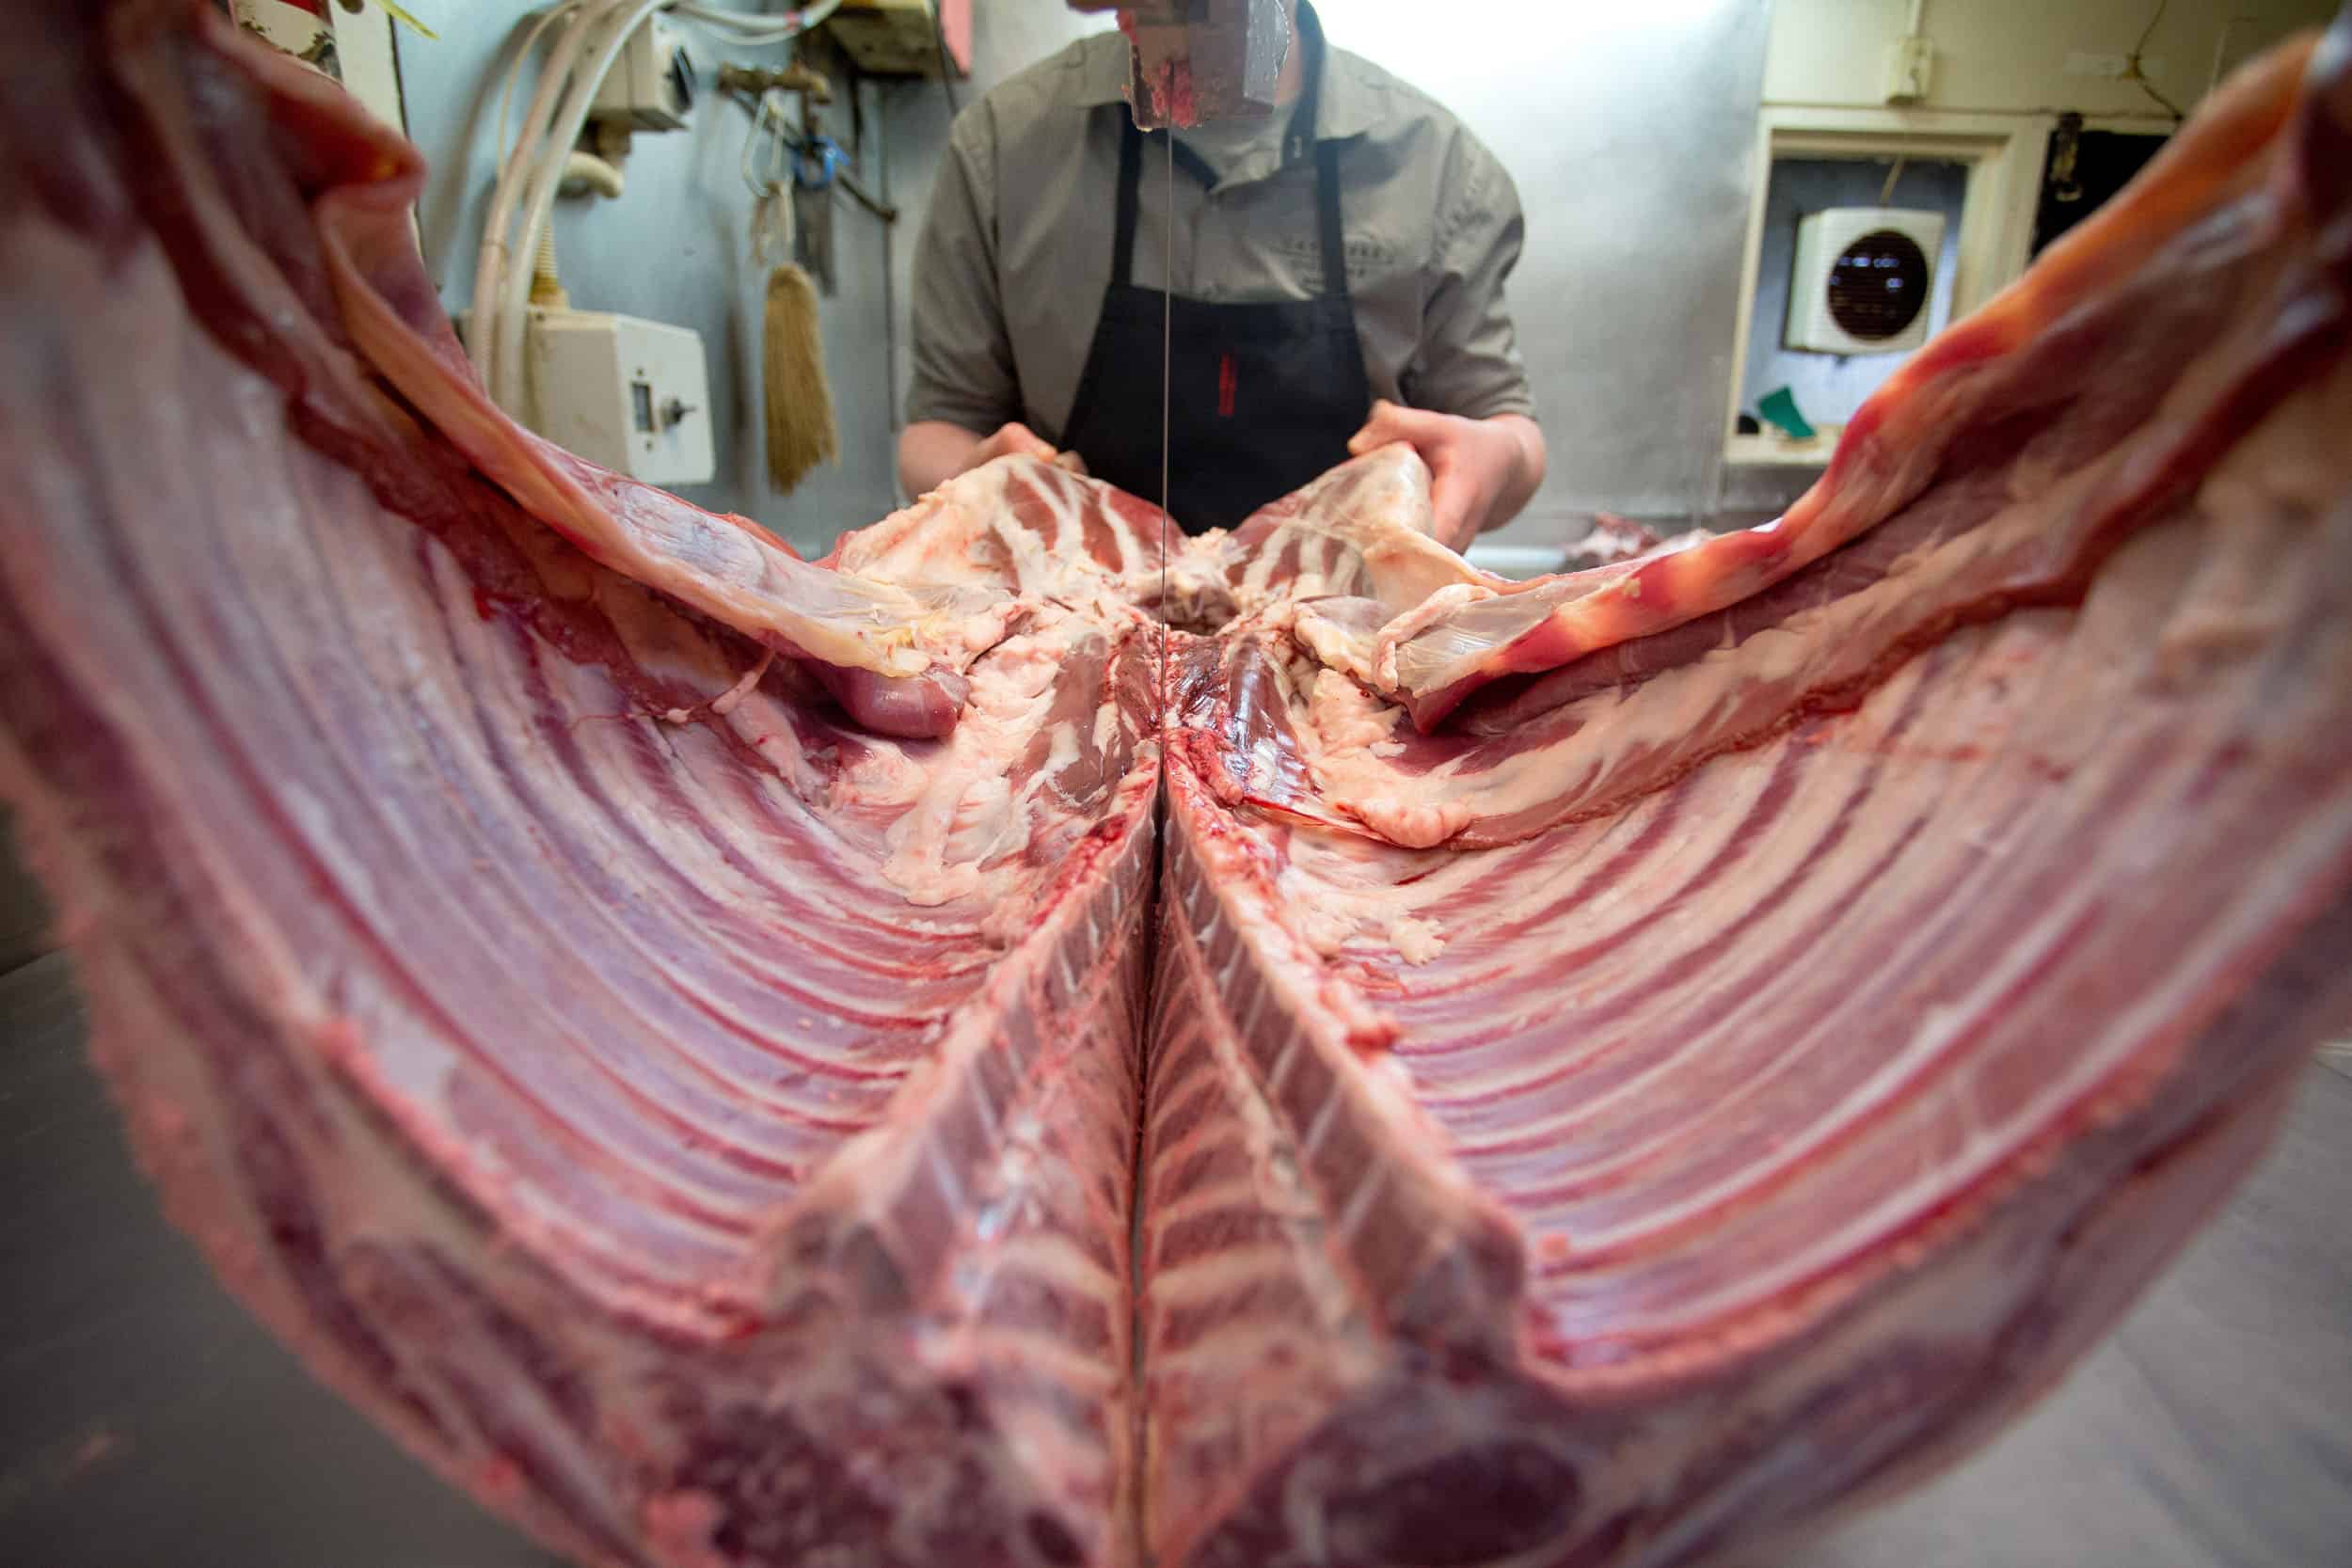 Butcher slices meat carcass with band saw.